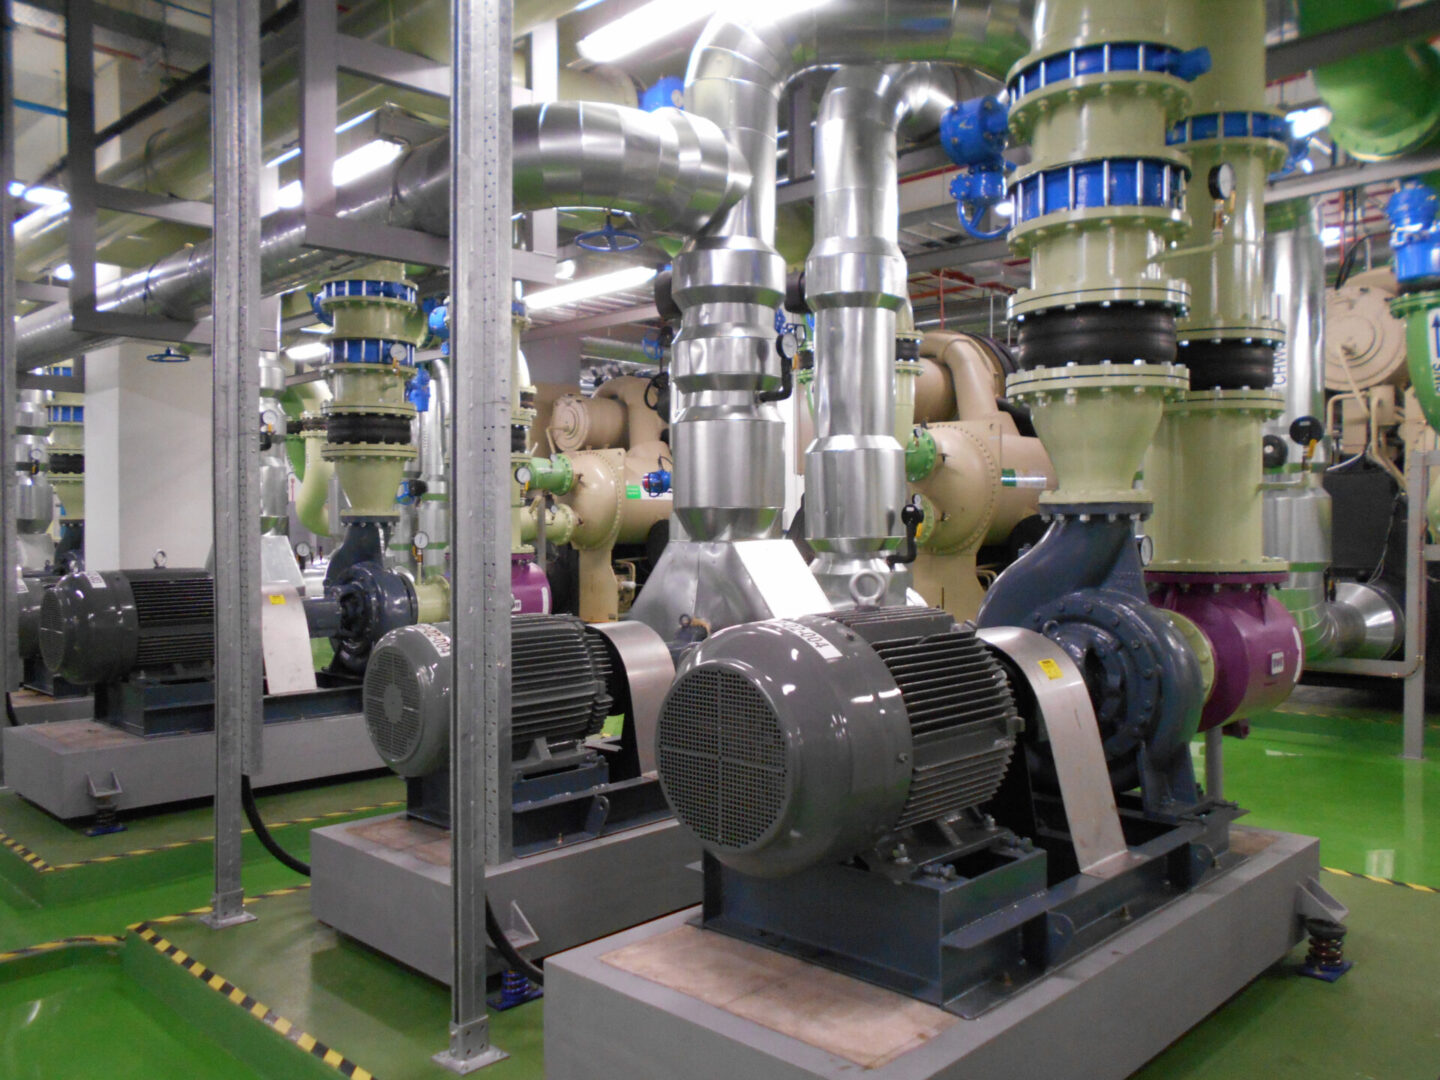 A large industrial machine room with many pipes.